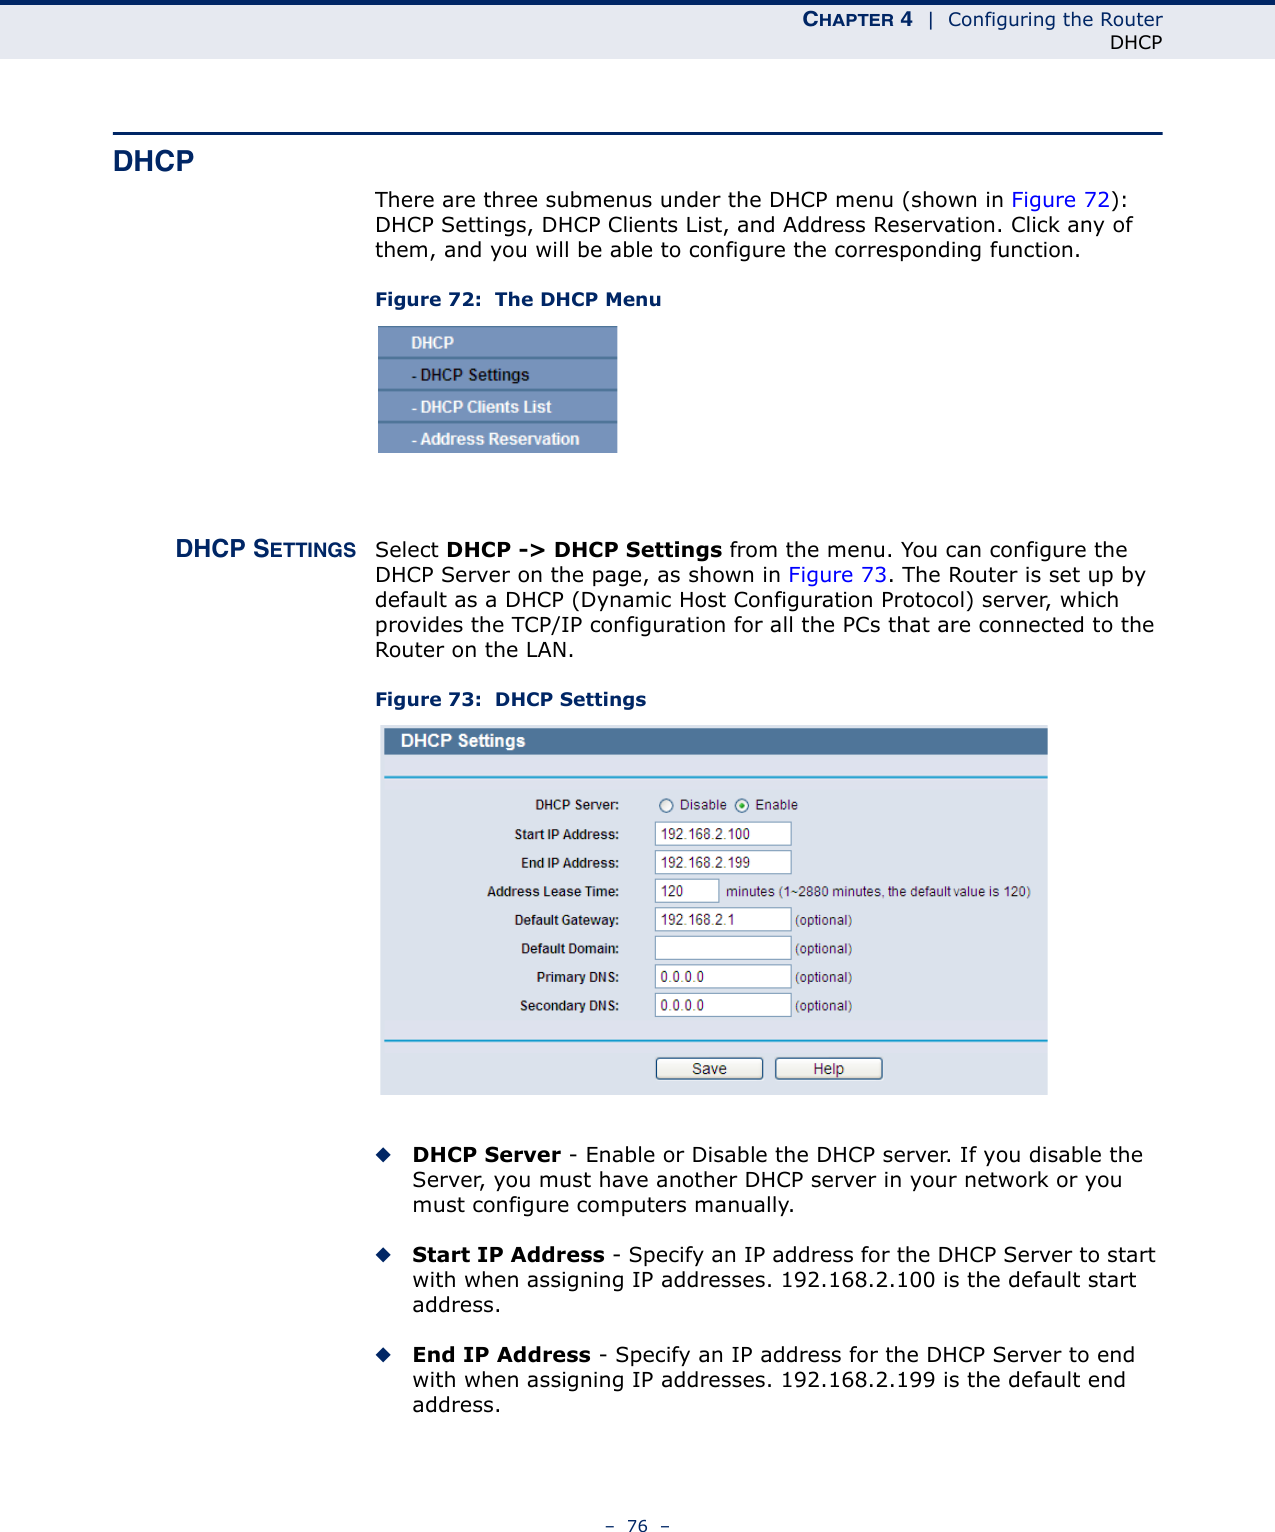 CHAPTER 4  |  Configuring the RouterDHCP–  76  –DHCPThere are three submenus under the DHCP menu (shown in Figure 72): DHCP Settings, DHCP Clients List, and Address Reservation. Click any of them, and you will be able to configure the corresponding function.Figure 72:  The DHCP MenuDHCP SETTINGS Select DHCP -&gt; DHCP Settings from the menu. You can configure the DHCP Server on the page, as shown in Figure 73. The Router is set up by default as a DHCP (Dynamic Host Configuration Protocol) server, which provides the TCP/IP configuration for all the PCs that are connected to the Router on the LAN. Figure 73:  DHCP Settings◆DHCP Server - Enable or Disable the DHCP server. If you disable the Server, you must have another DHCP server in your network or you must configure computers manually.◆Start IP Address - Specify an IP address for the DHCP Server to start with when assigning IP addresses. 192.168.2.100 is the default start address.◆End IP Address - Specify an IP address for the DHCP Server to end with when assigning IP addresses. 192.168.2.199 is the default end address.